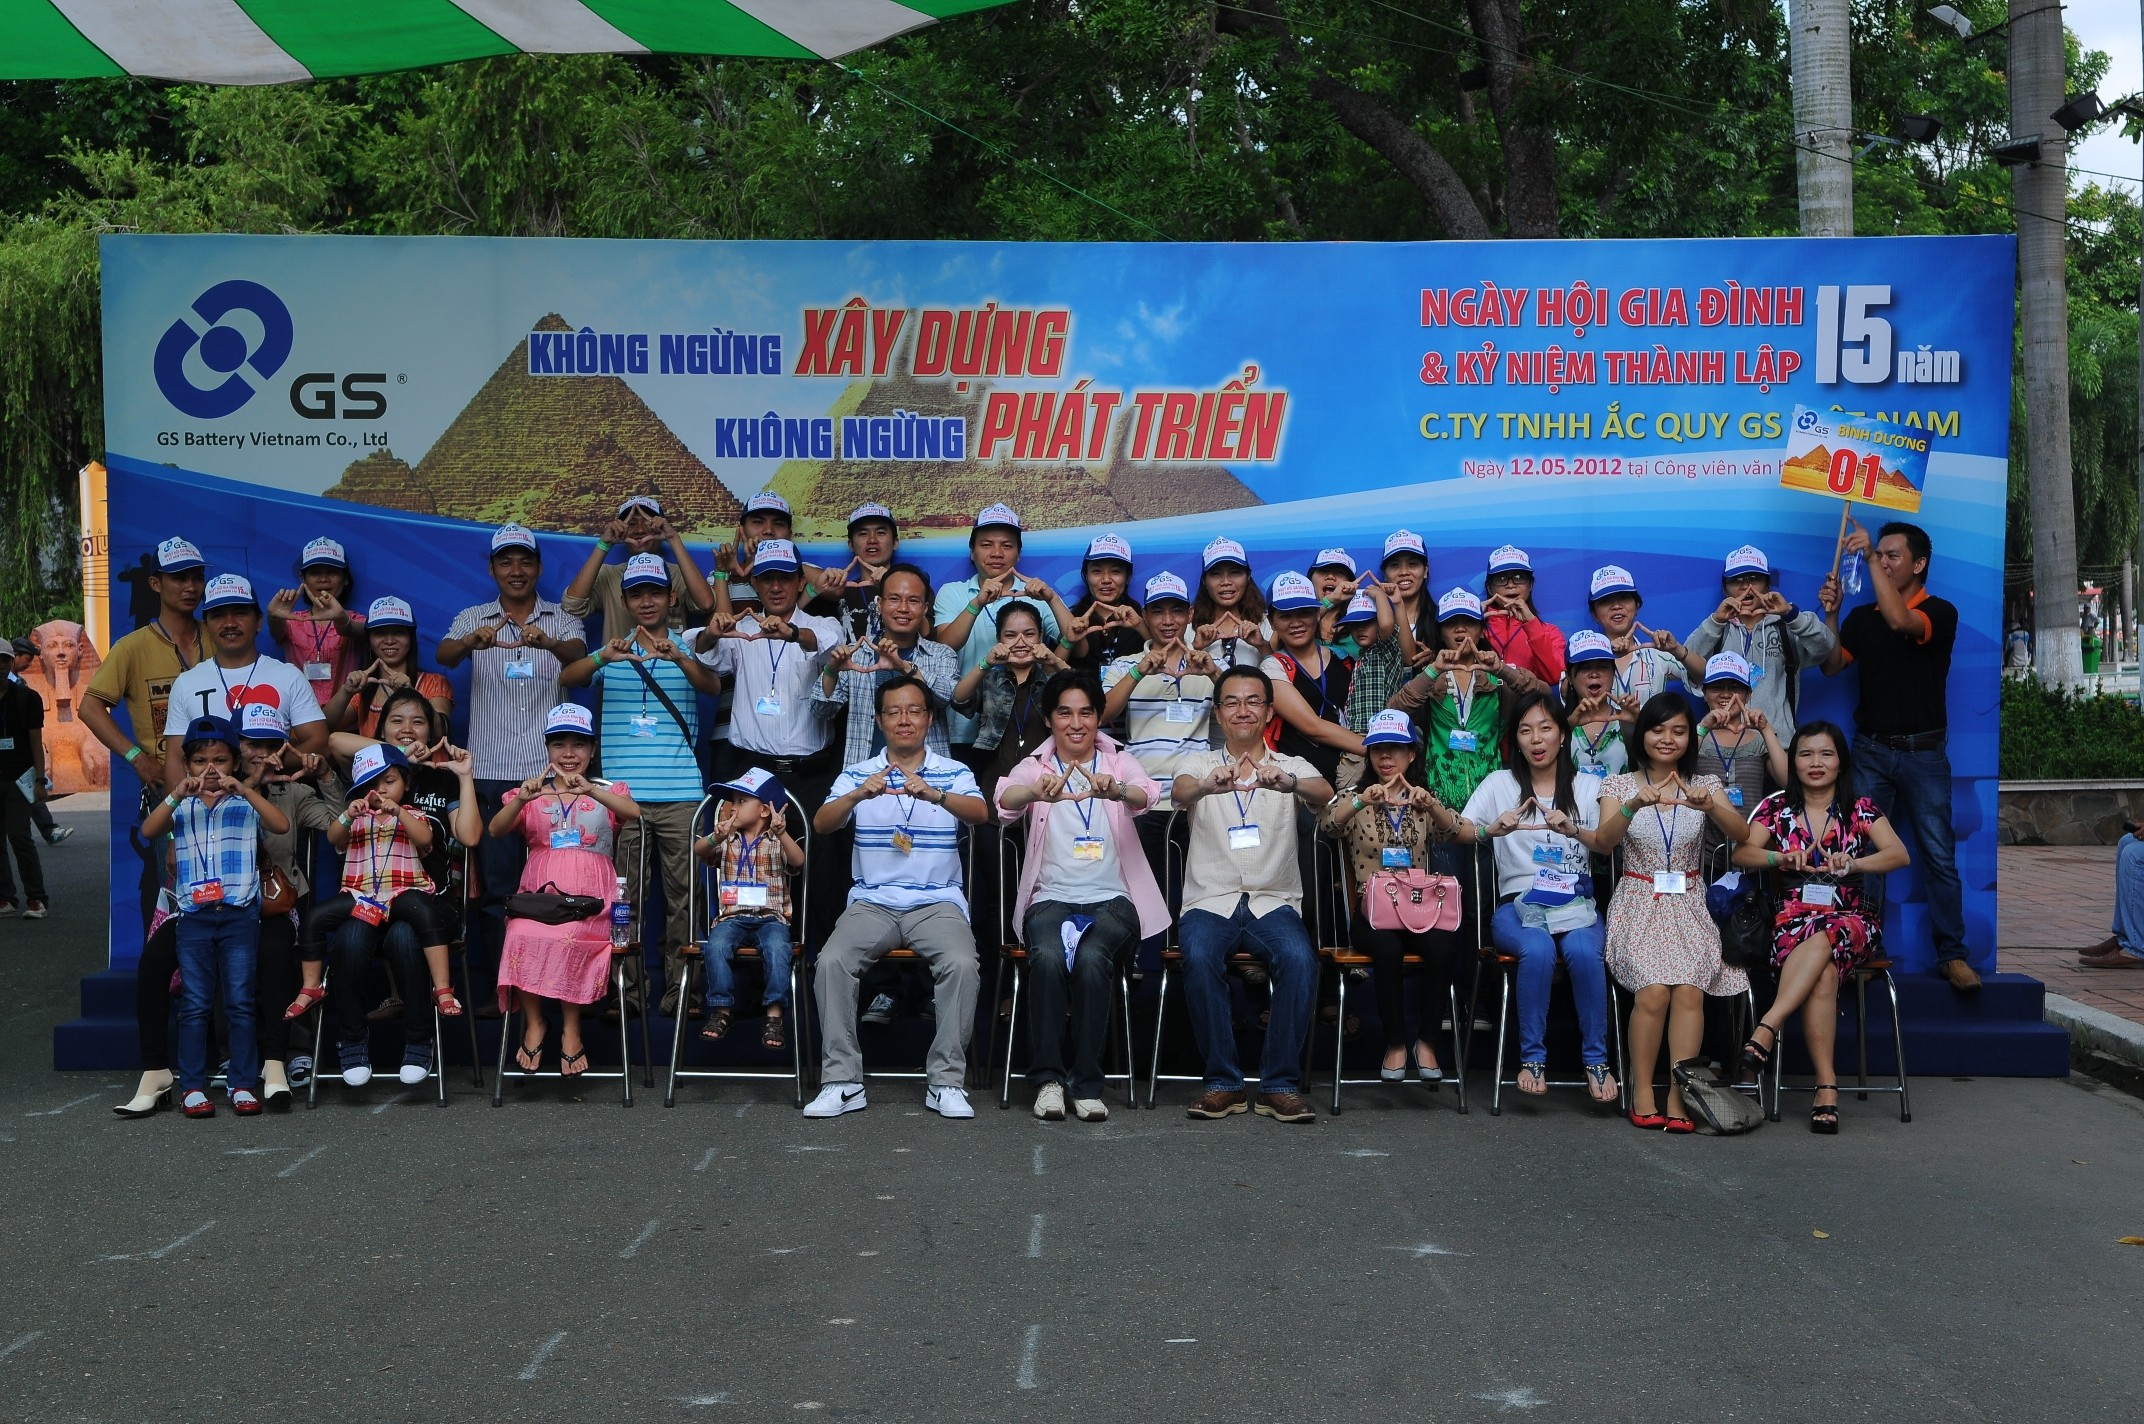 The 2nd Family Festival Day and 15 Years of GSV Establishment Ceremony at Dam Sen Park on 12th May 2012.